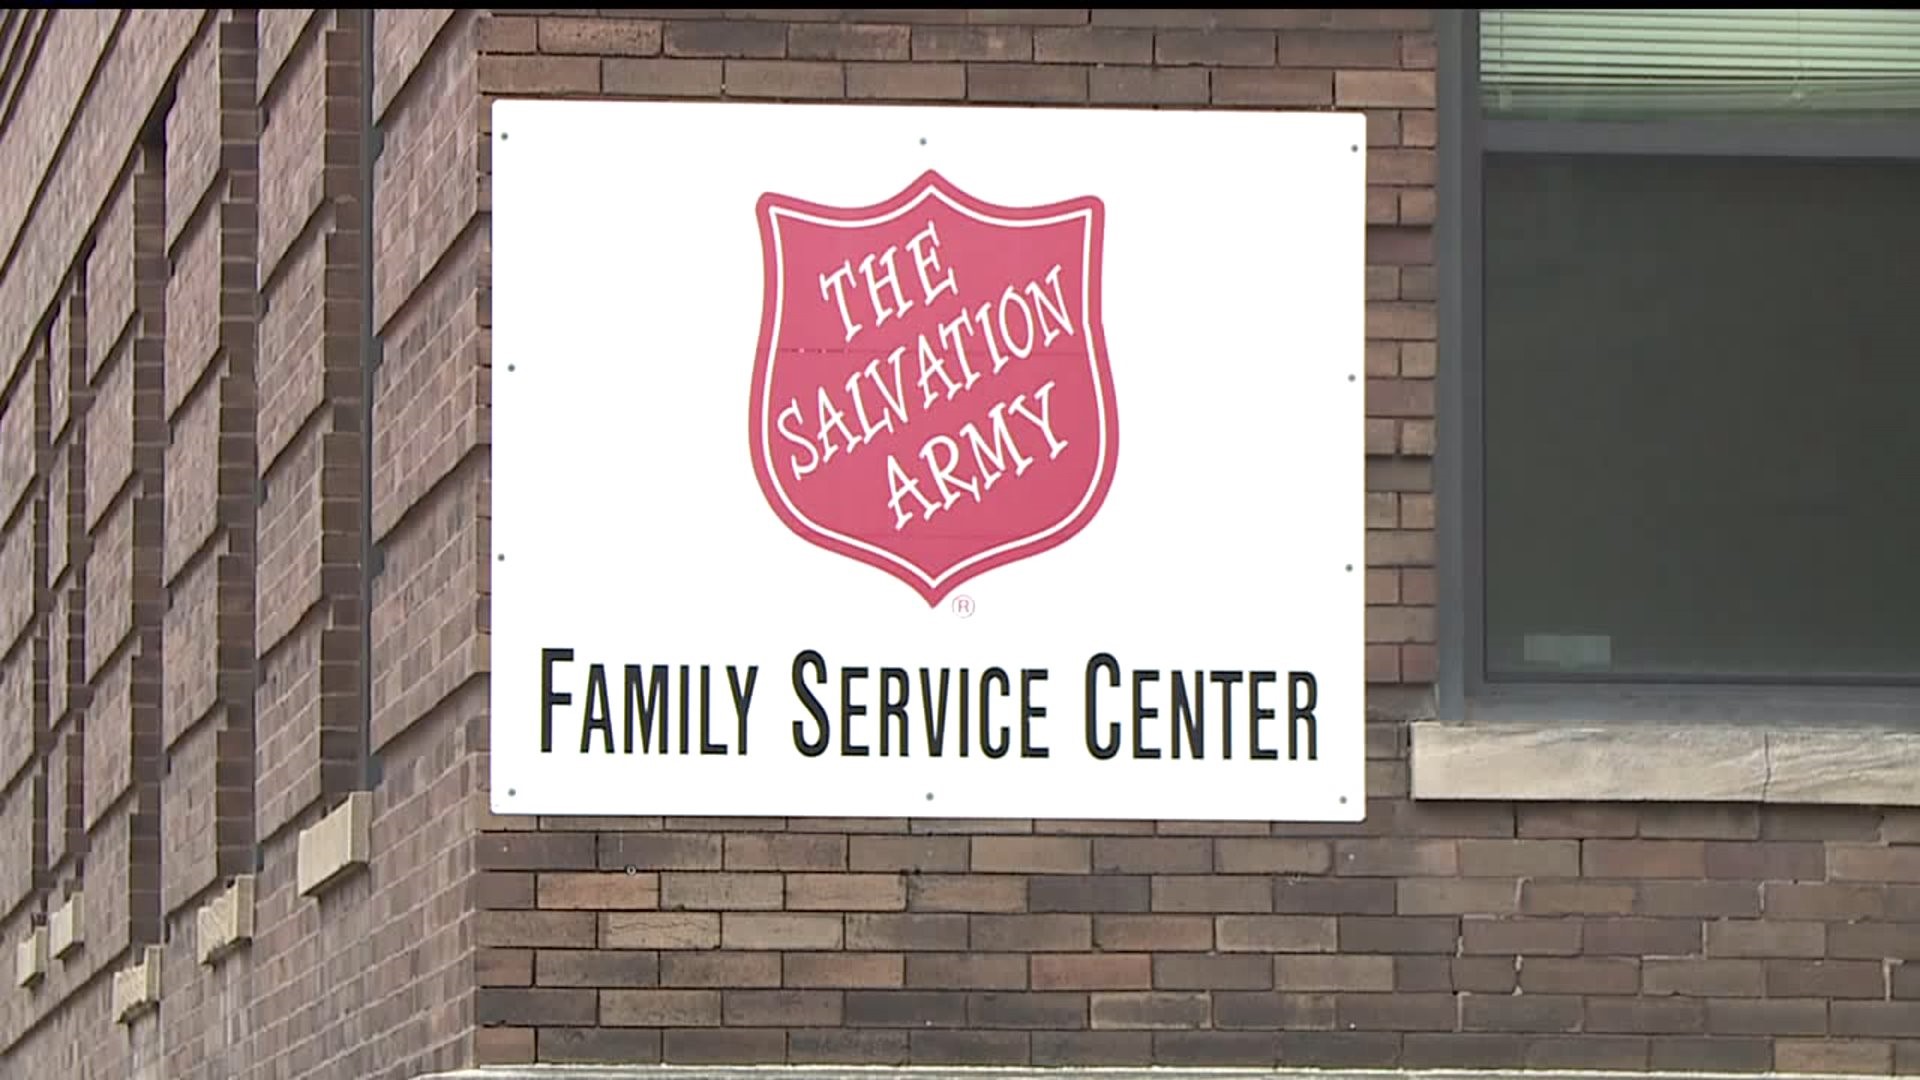 Salvation Army switches gears on tackling homelessness